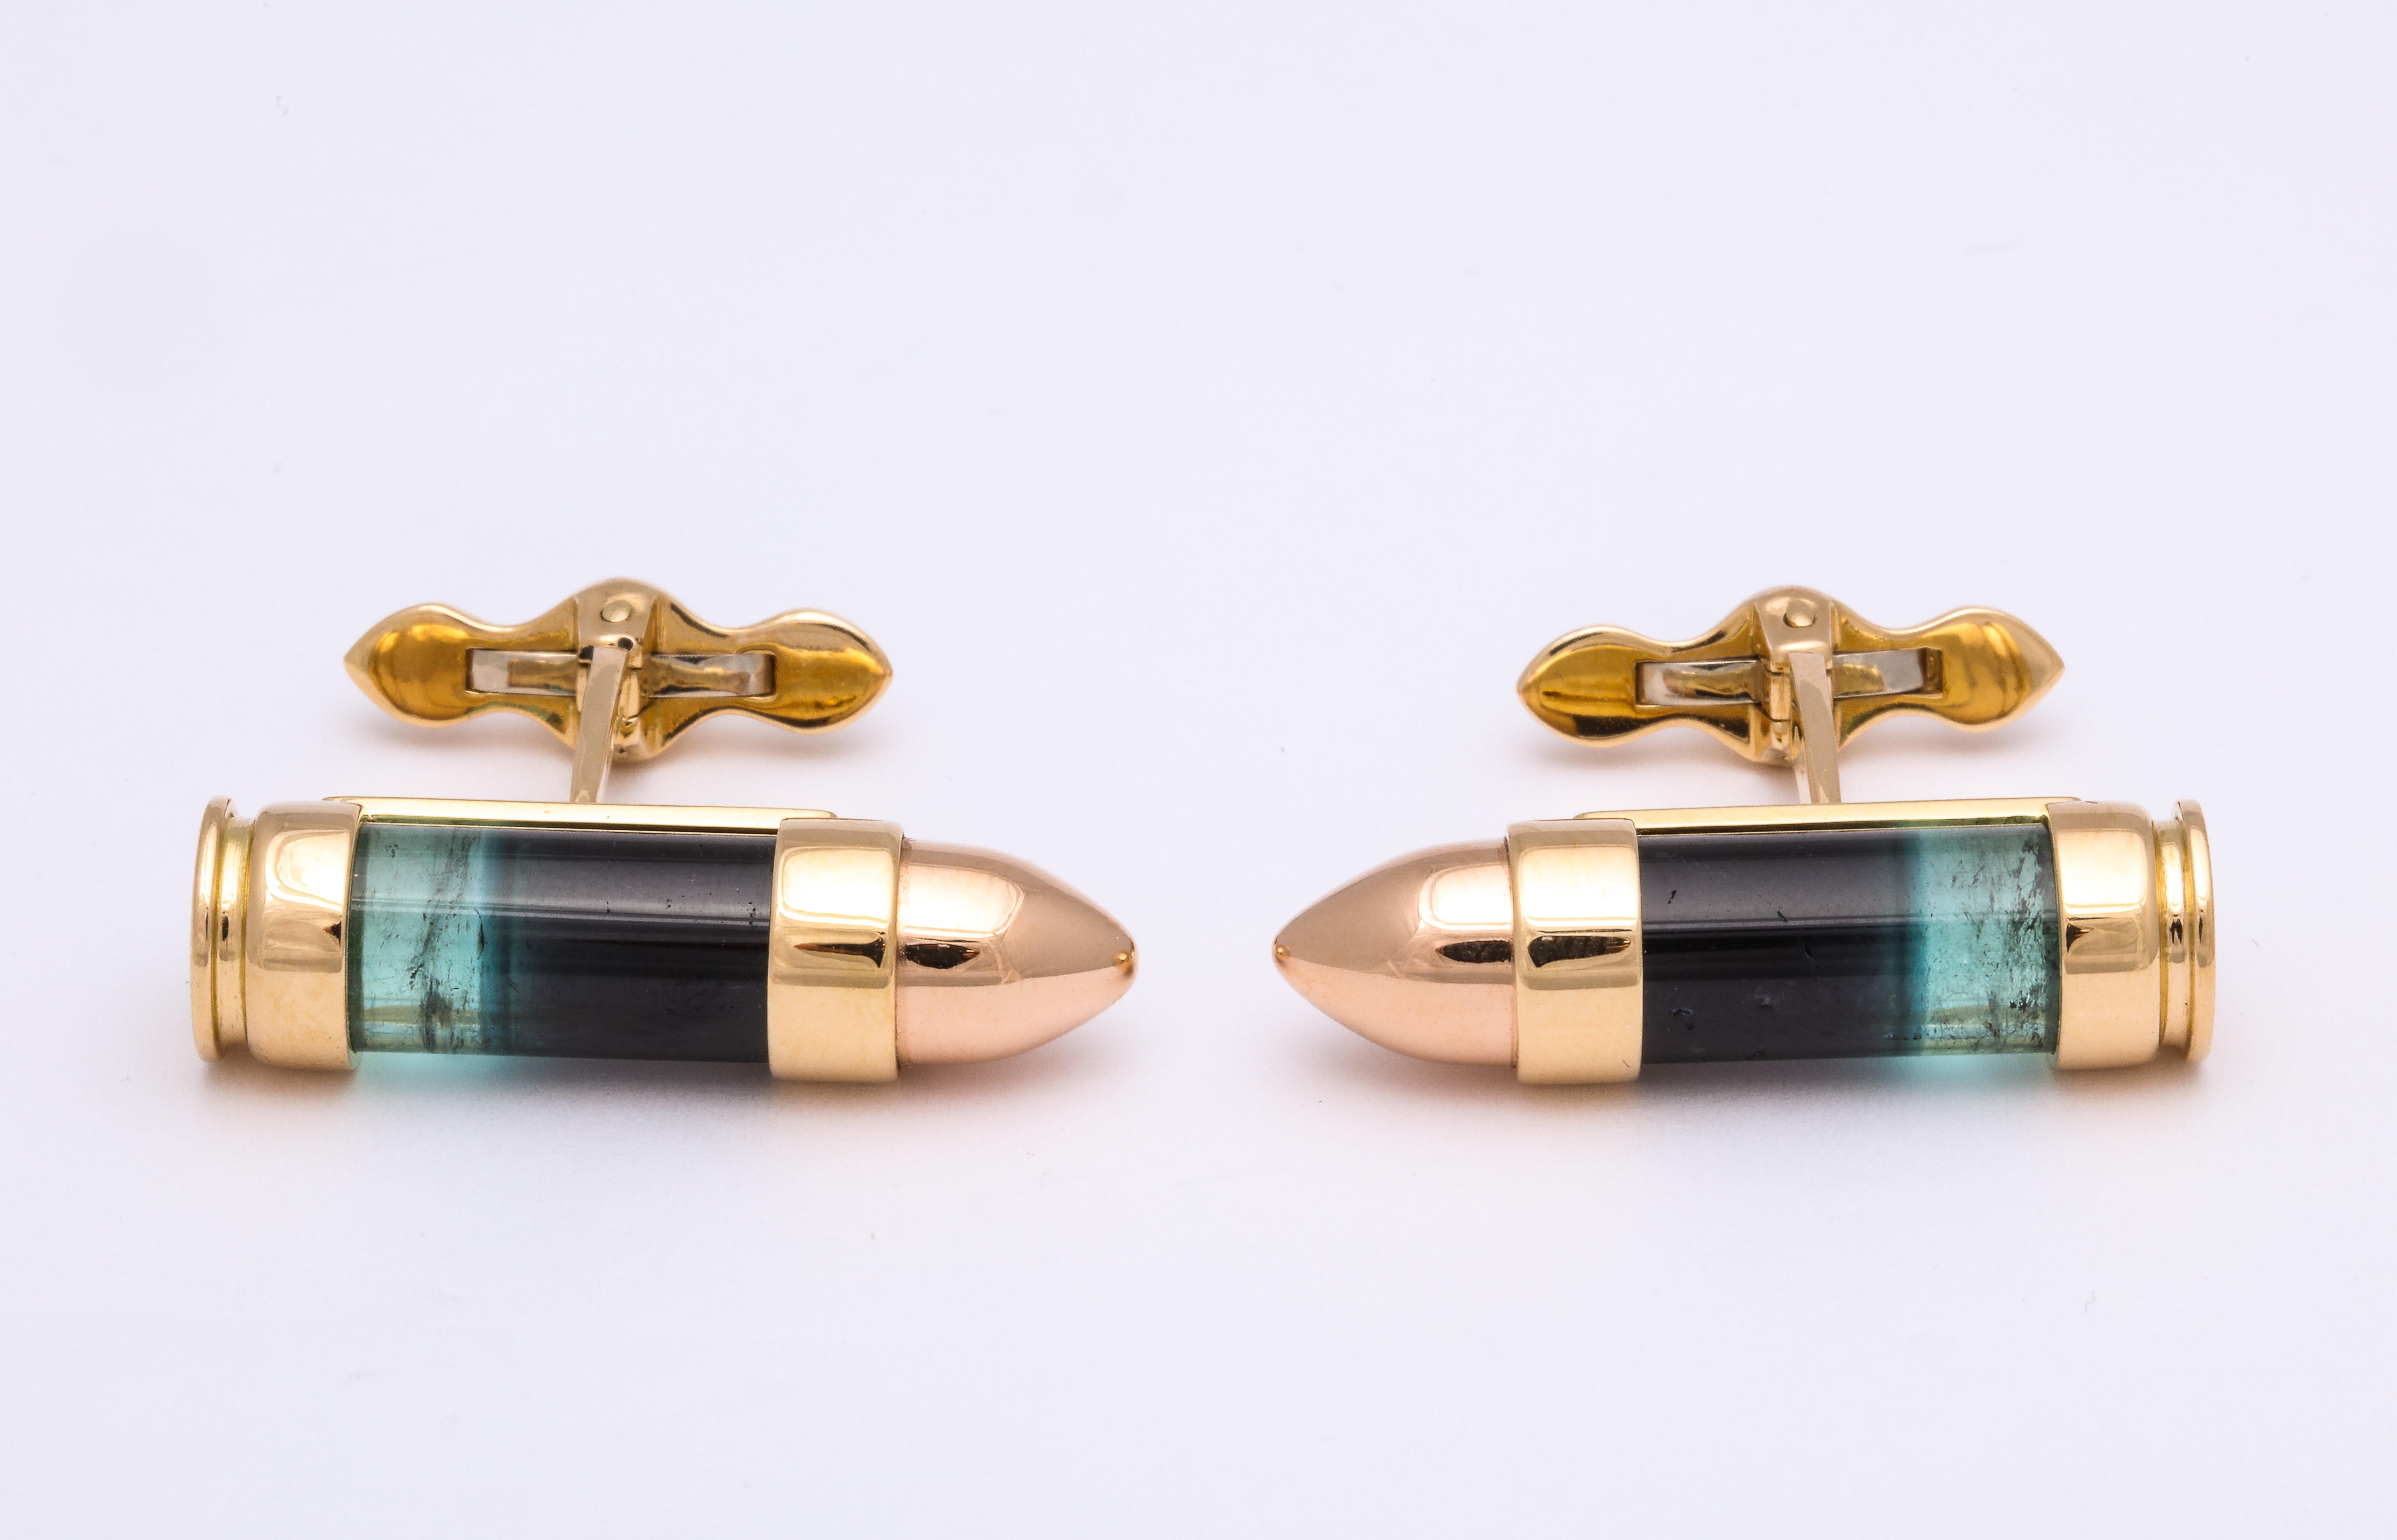 It's all in the details!
This completely one of a kind pair of cufflinks features a pair of cylindrical natural Brazilian bi-color tourmalines.  The combined green and black occur in the rough material and the expert stone cutter was able to make a